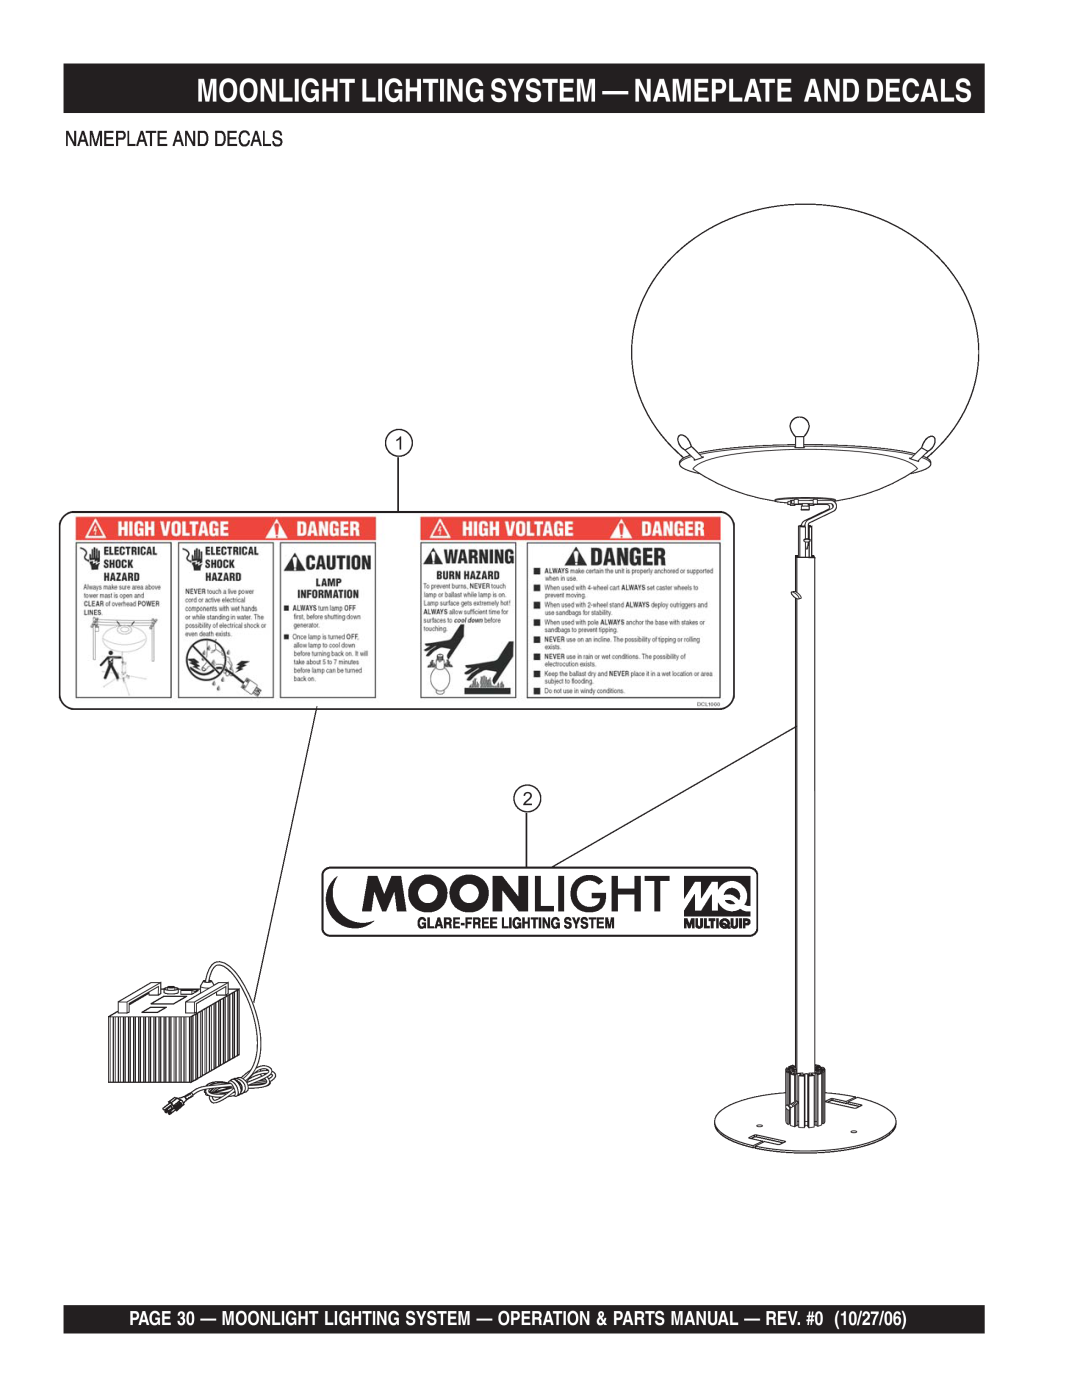 Multiquip MB400B, MB150, MB1000W manual Moonlight Lighting System - Nameplate And Decals 